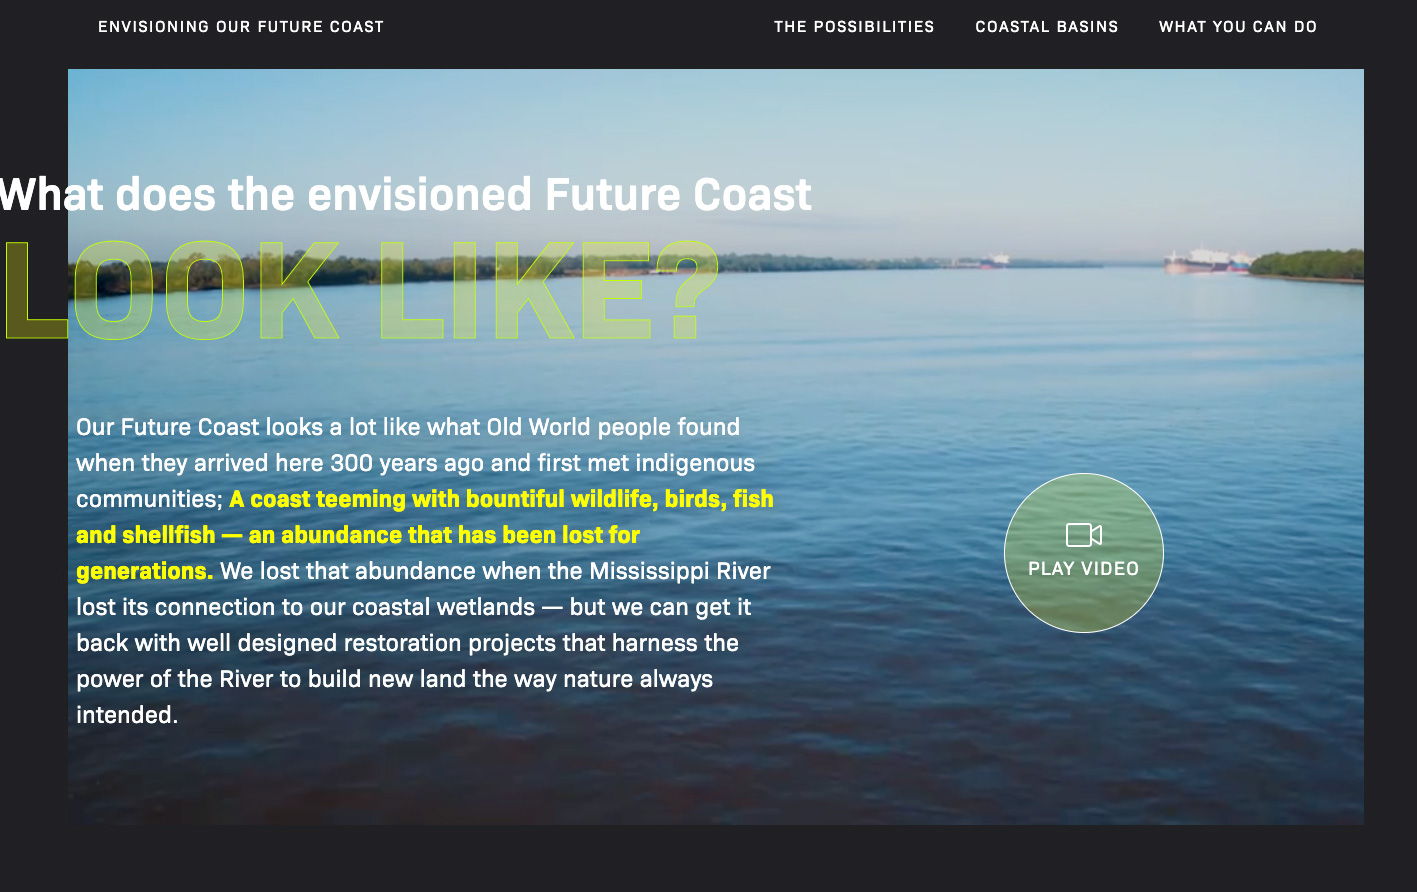 Envisioning Our Future Coast website - Deep Fried